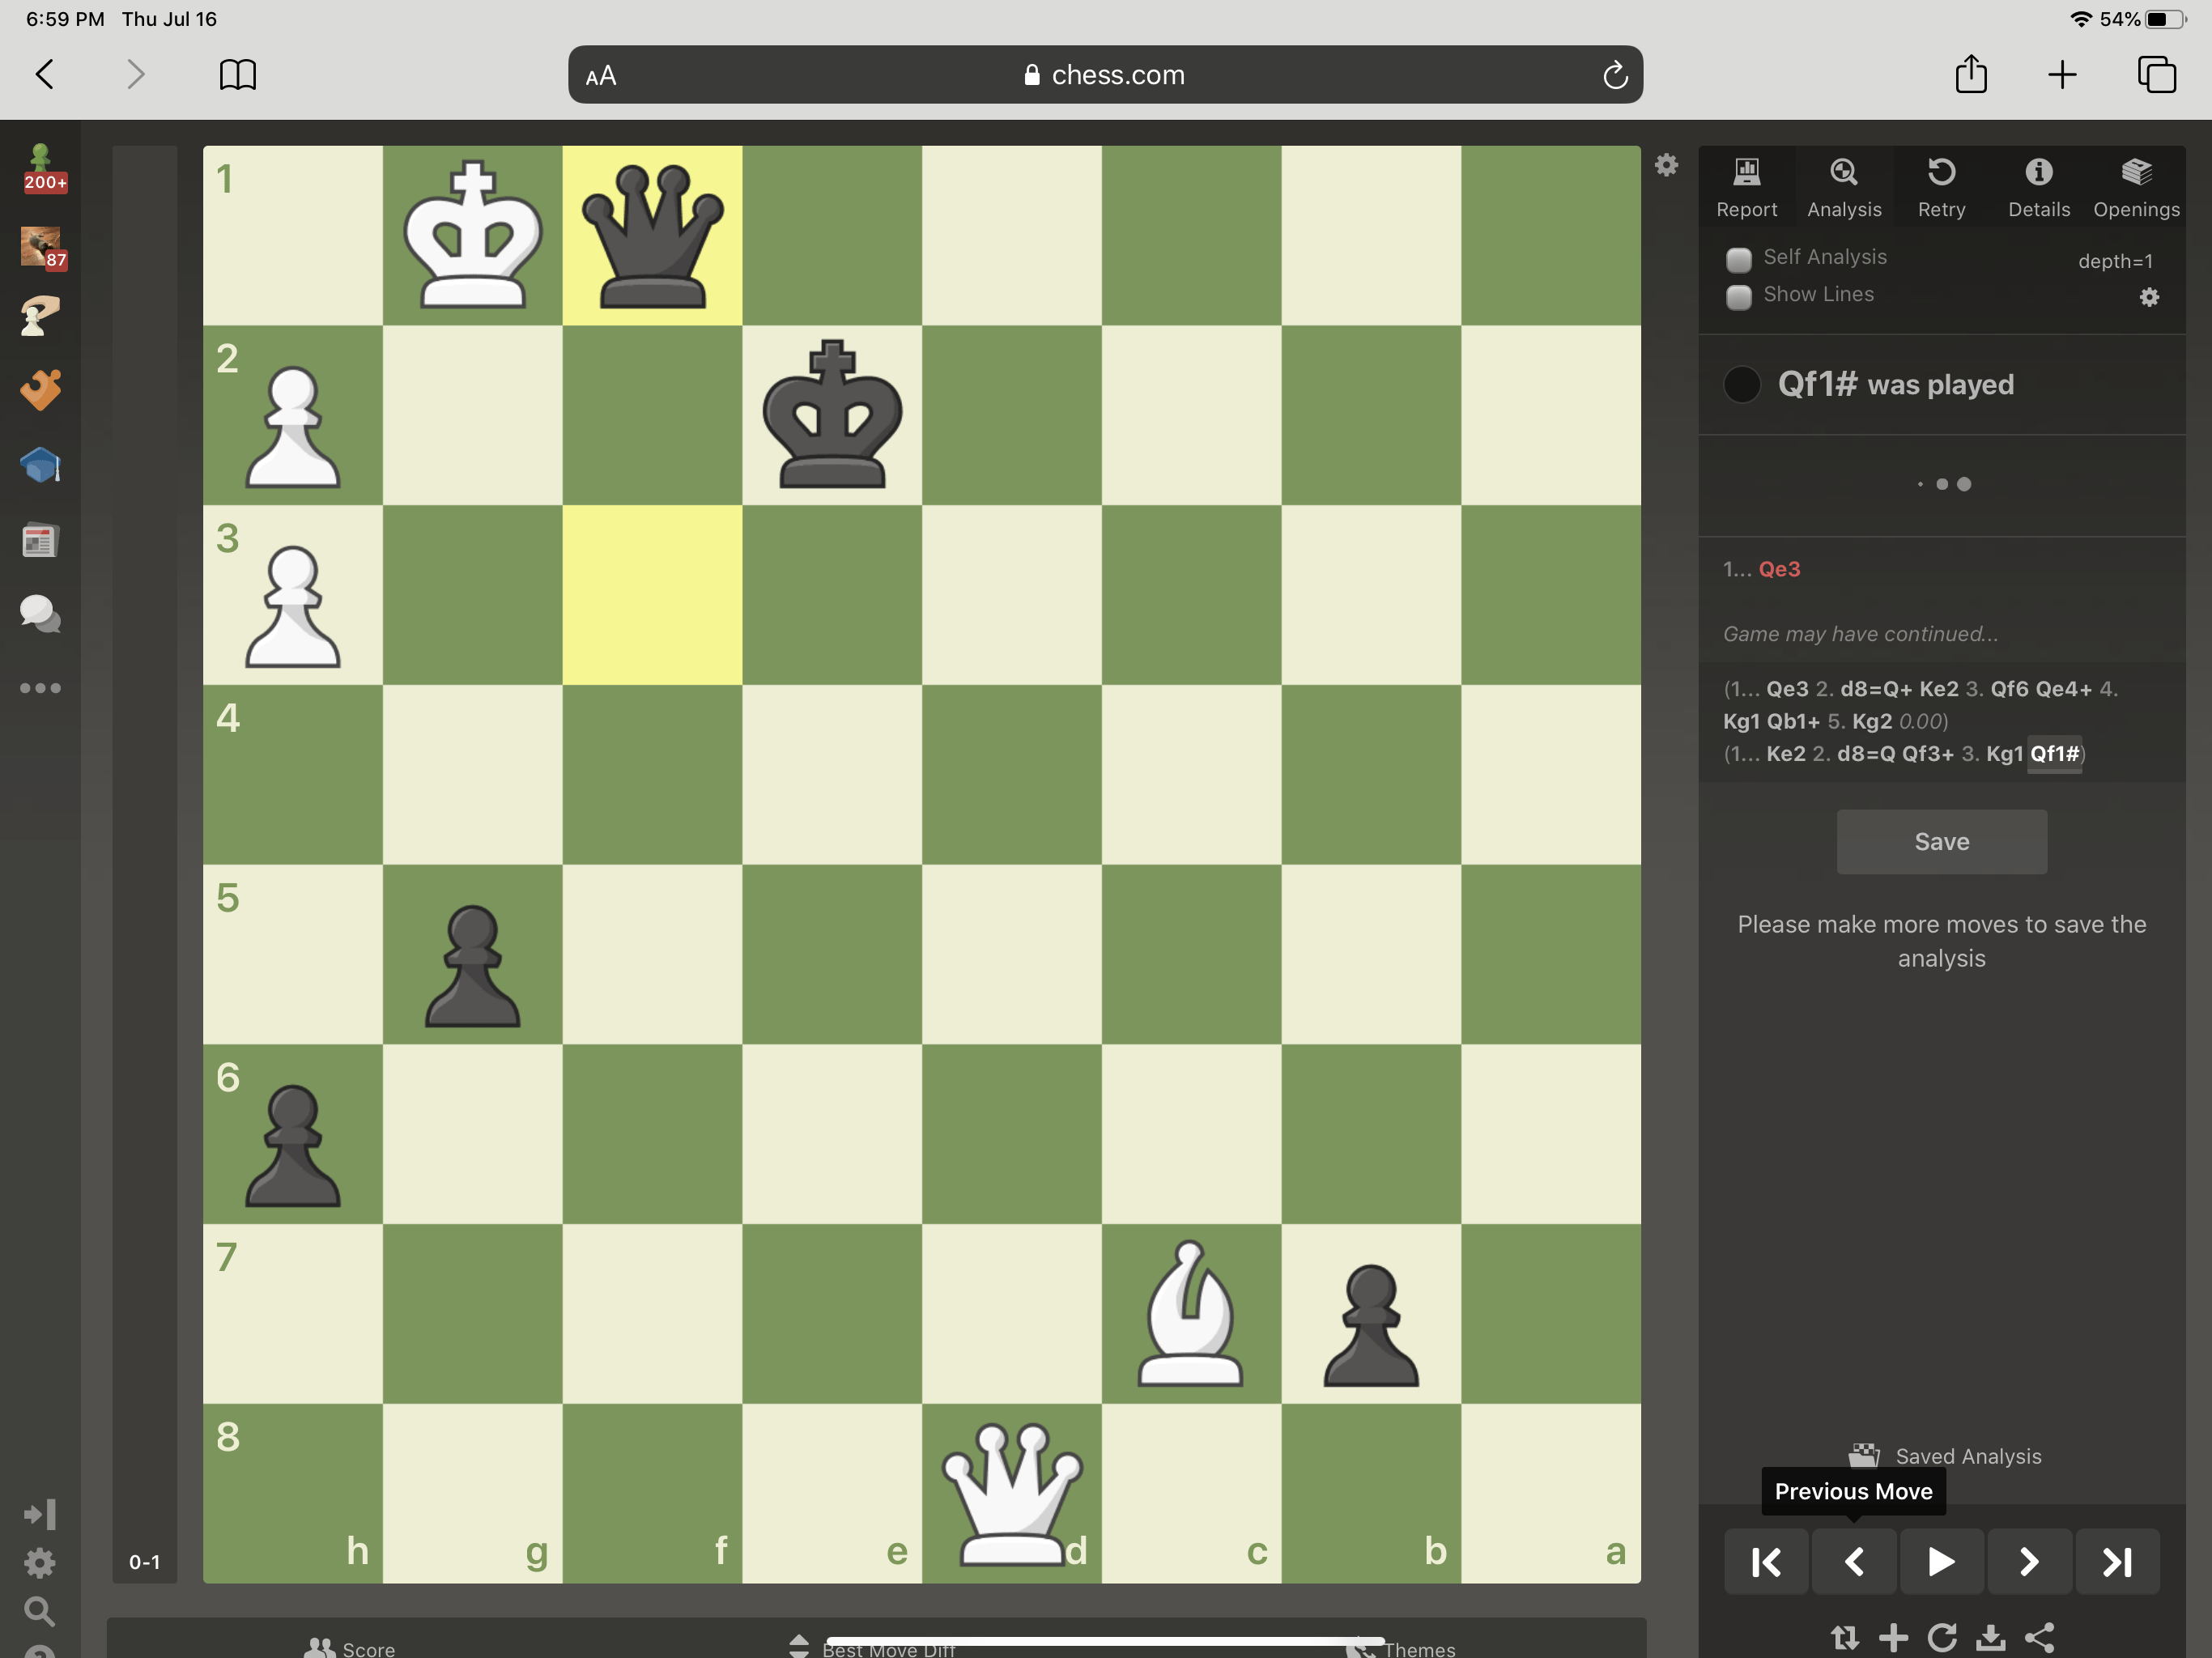 Hardest Checkmate in 1 - Chess Forums 